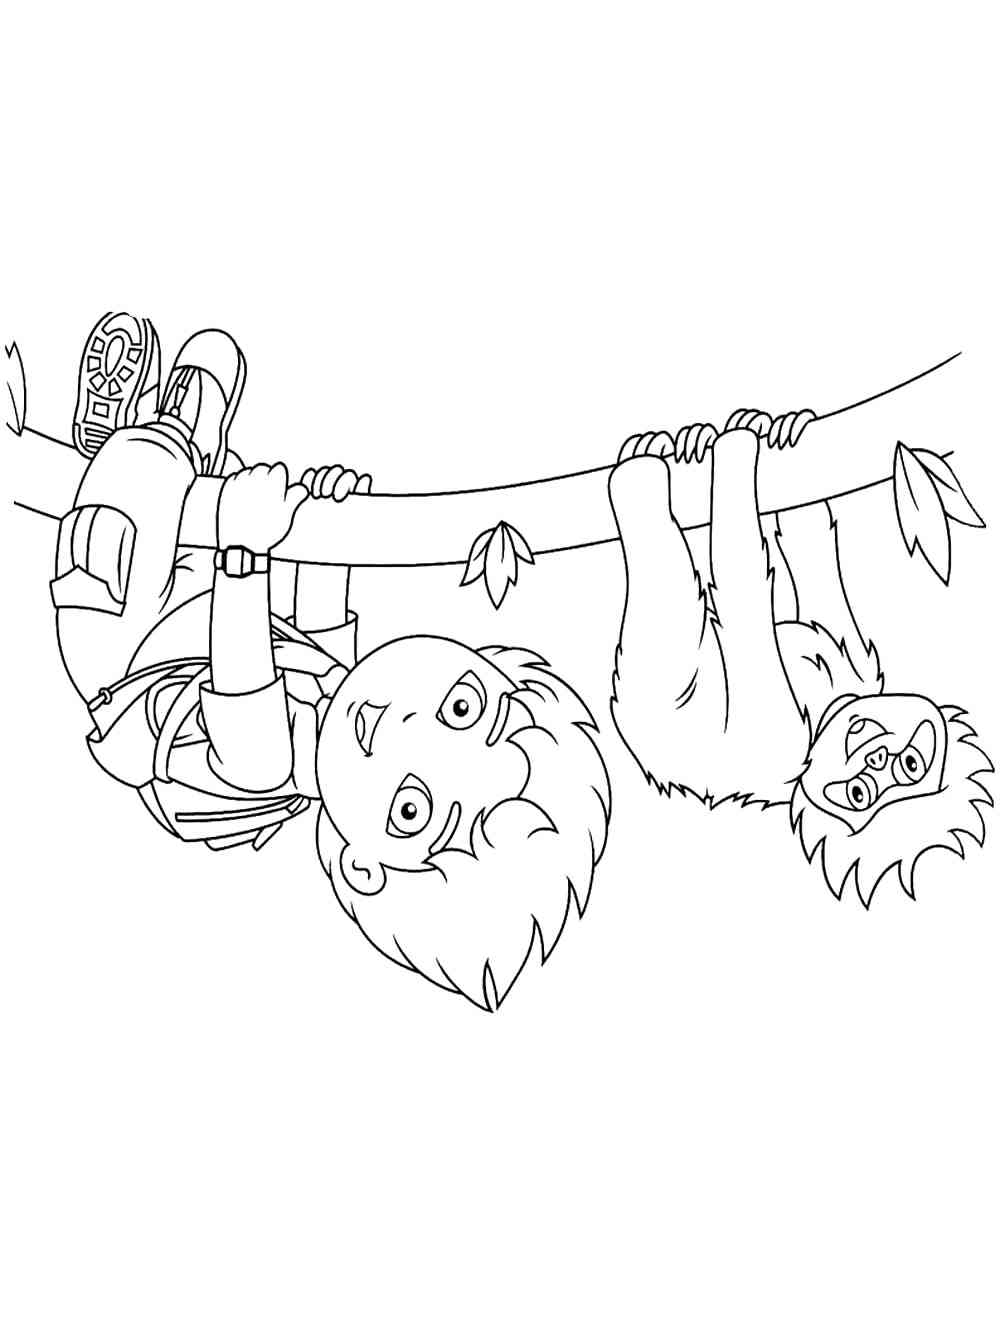 Diego 15 coloring page